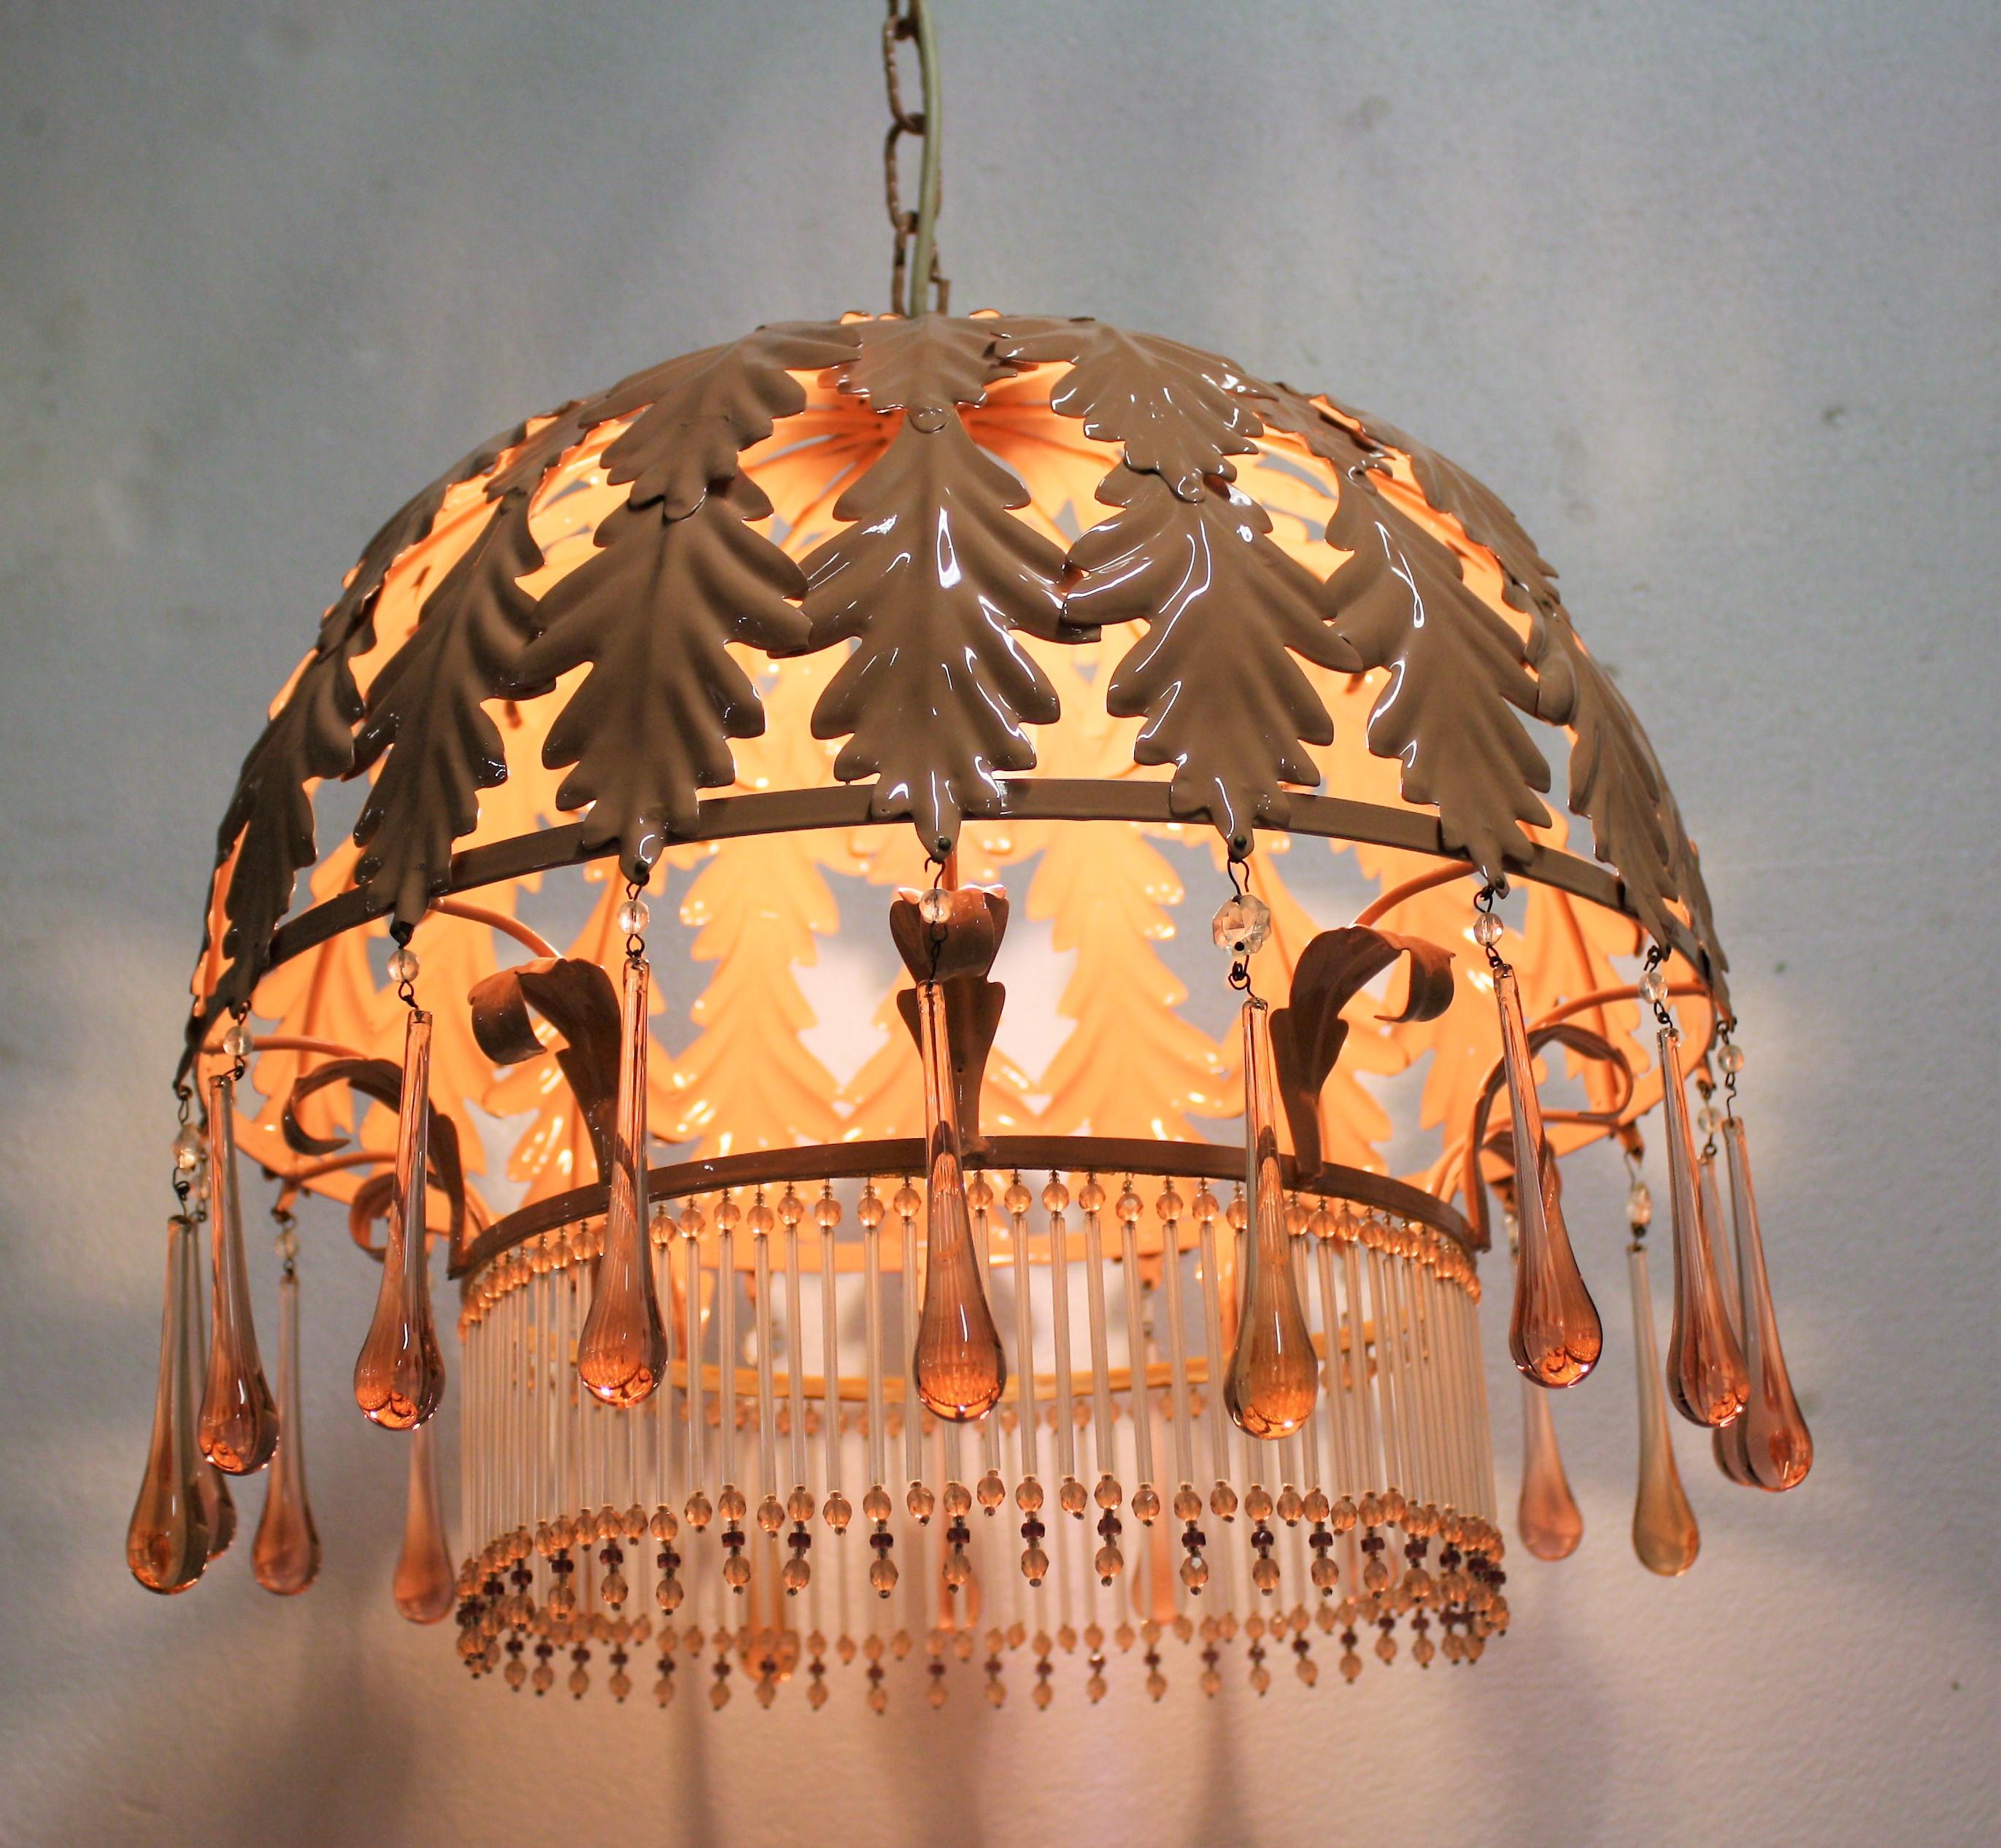 Vintage pink leaf motive chandelier made from metal with crystal Murano glass teardrops.

The lamp emits a beautiful, warm welcoming light.

This unusual chandelier is in very good condition, and has been tested and is ready for use.

It has a